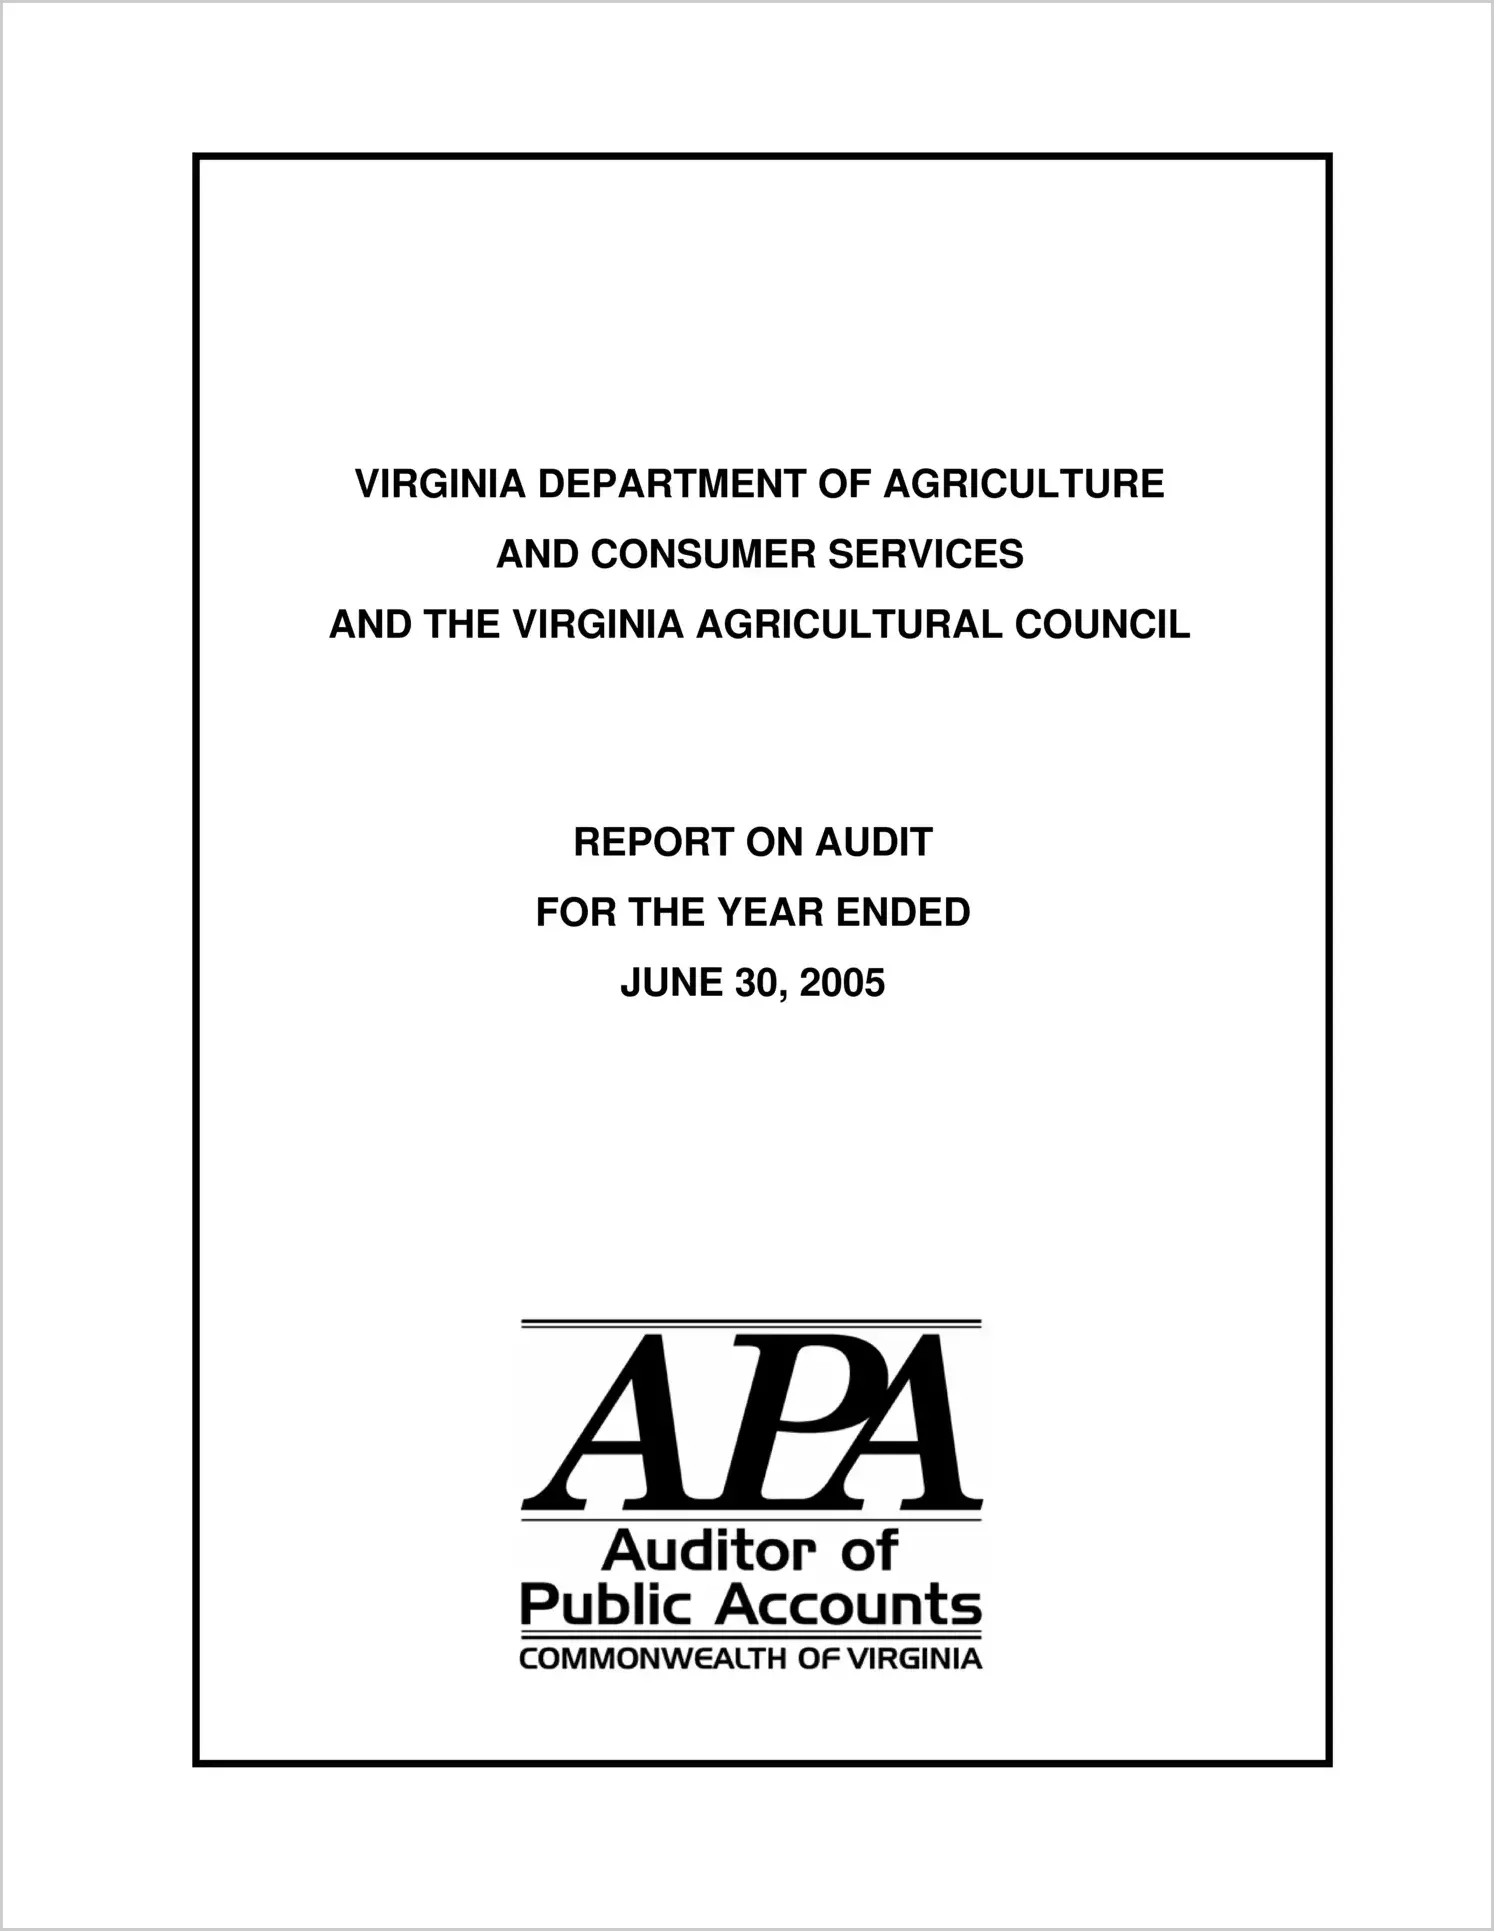 Department of Agriculture and Consumer Services for the year ended June 30, 2005